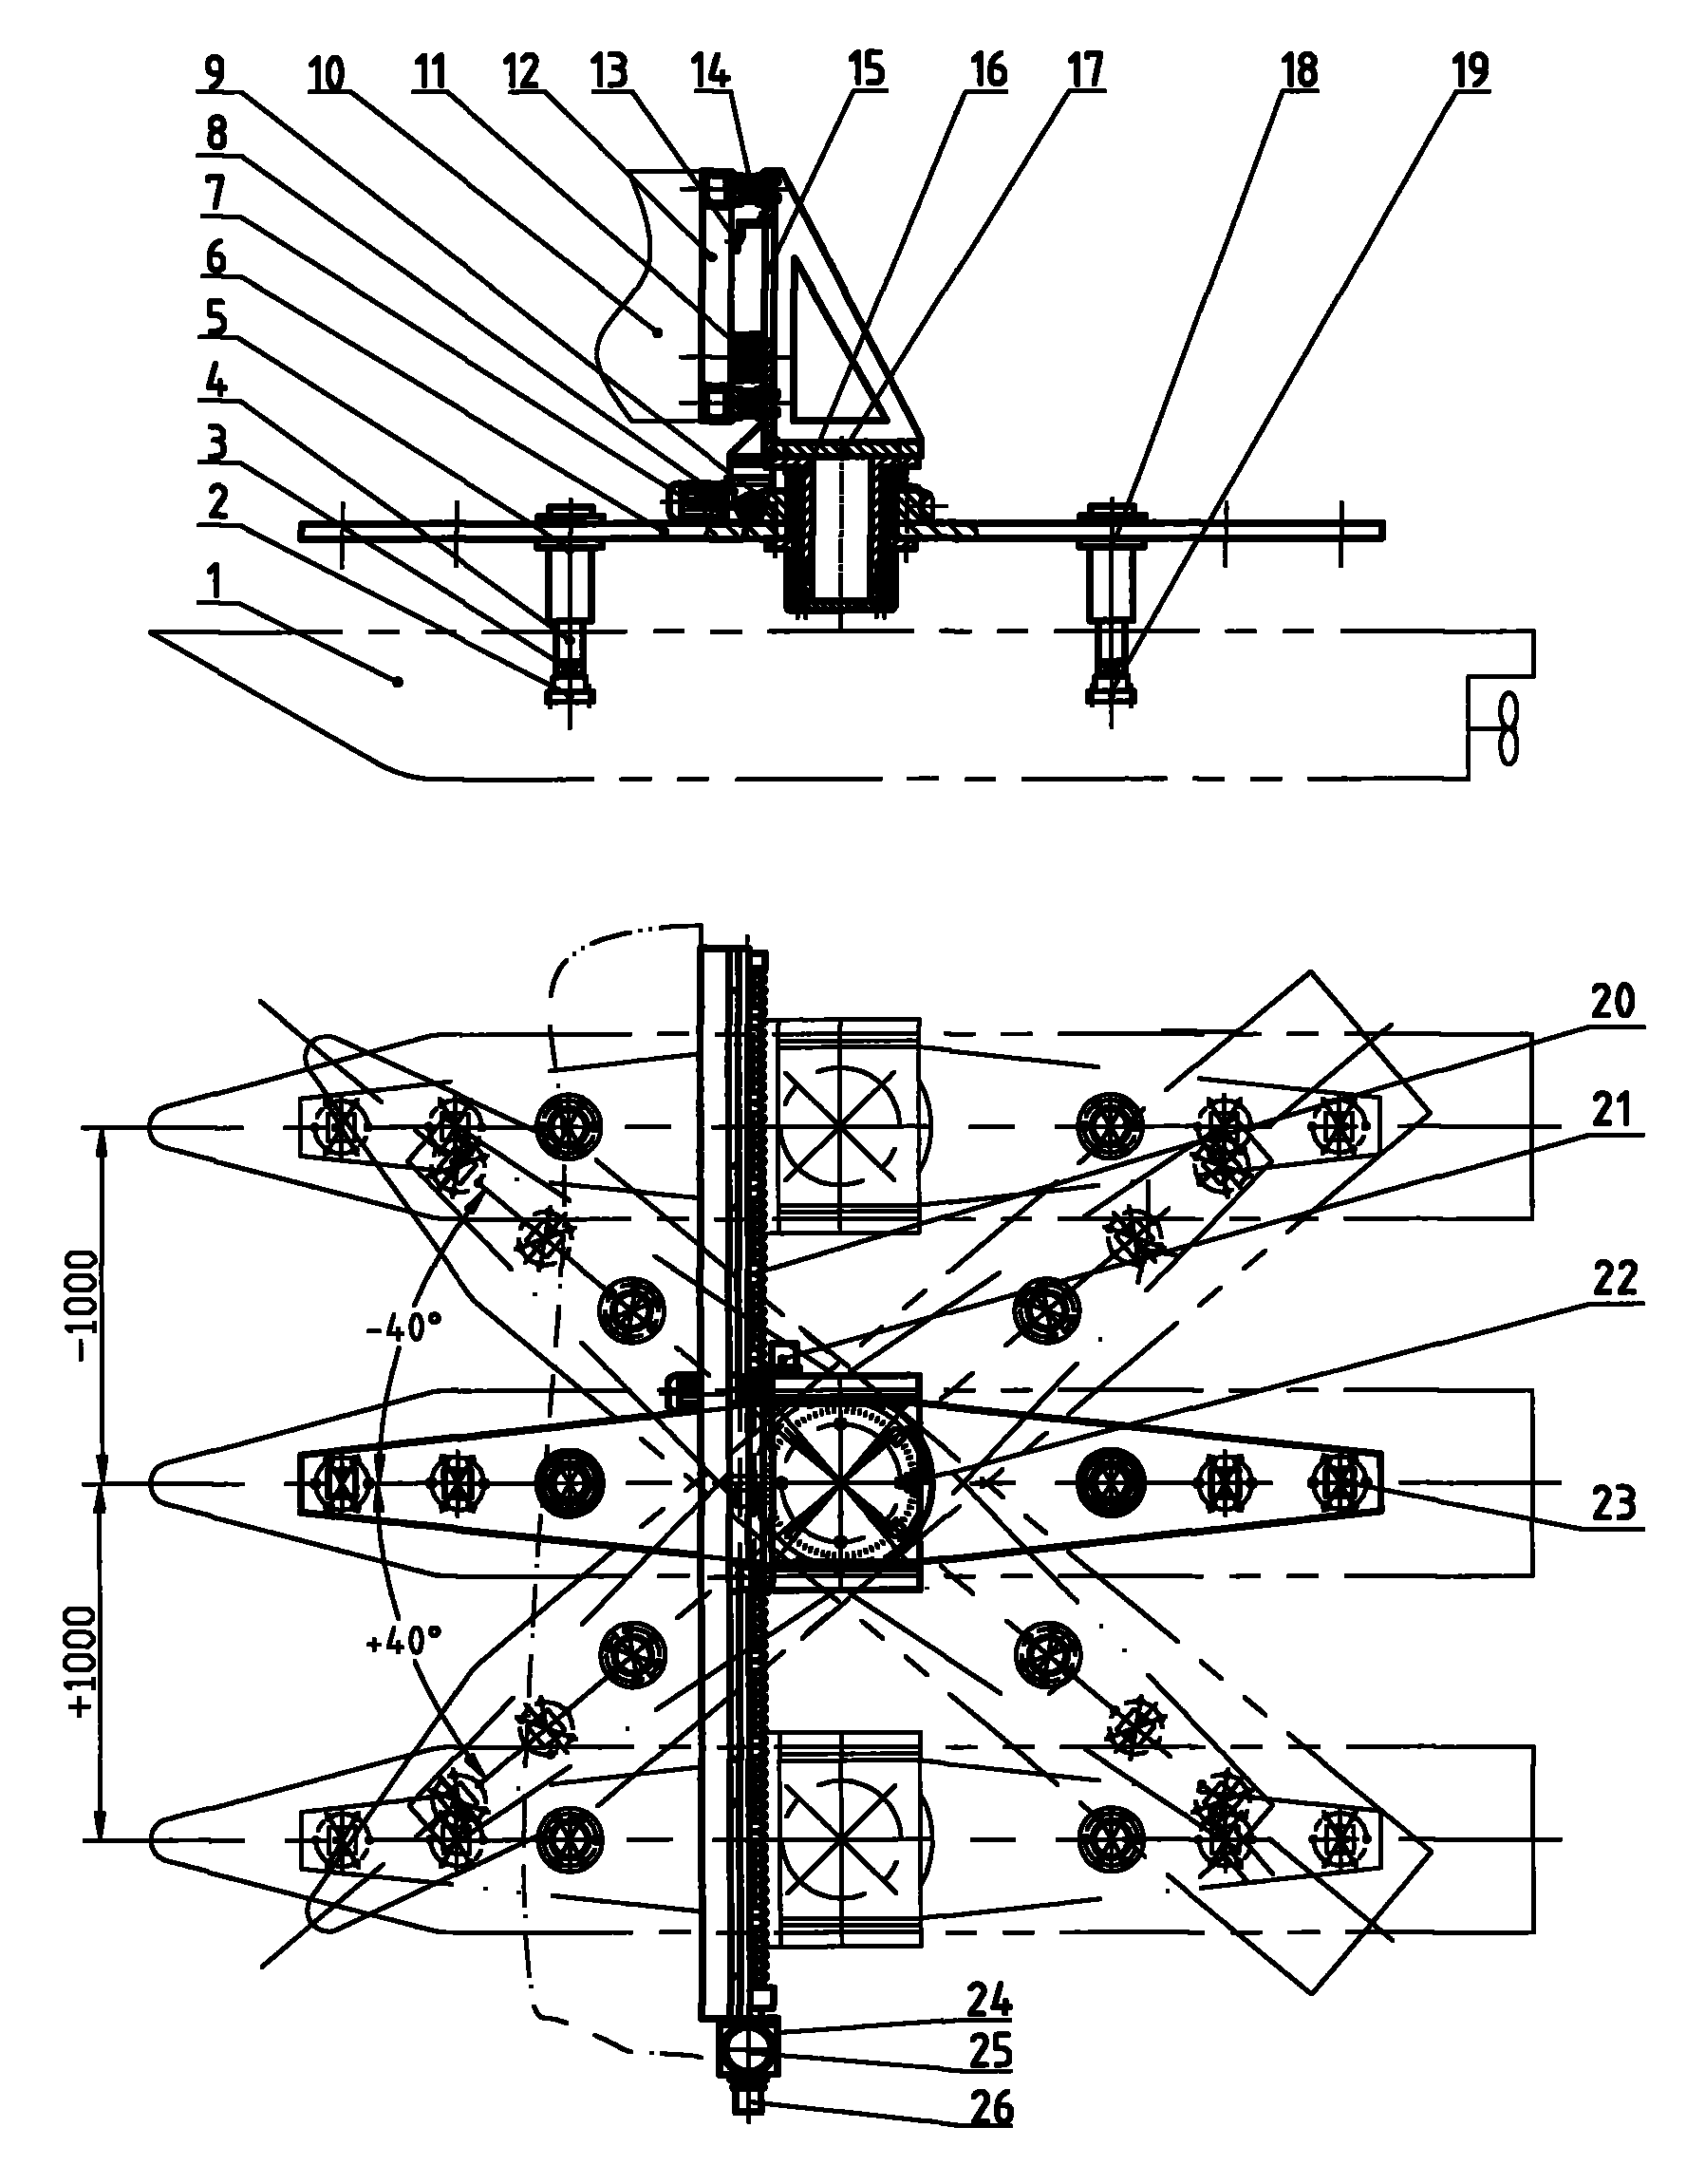 Horizontal plane motion mechanism for towing tank test